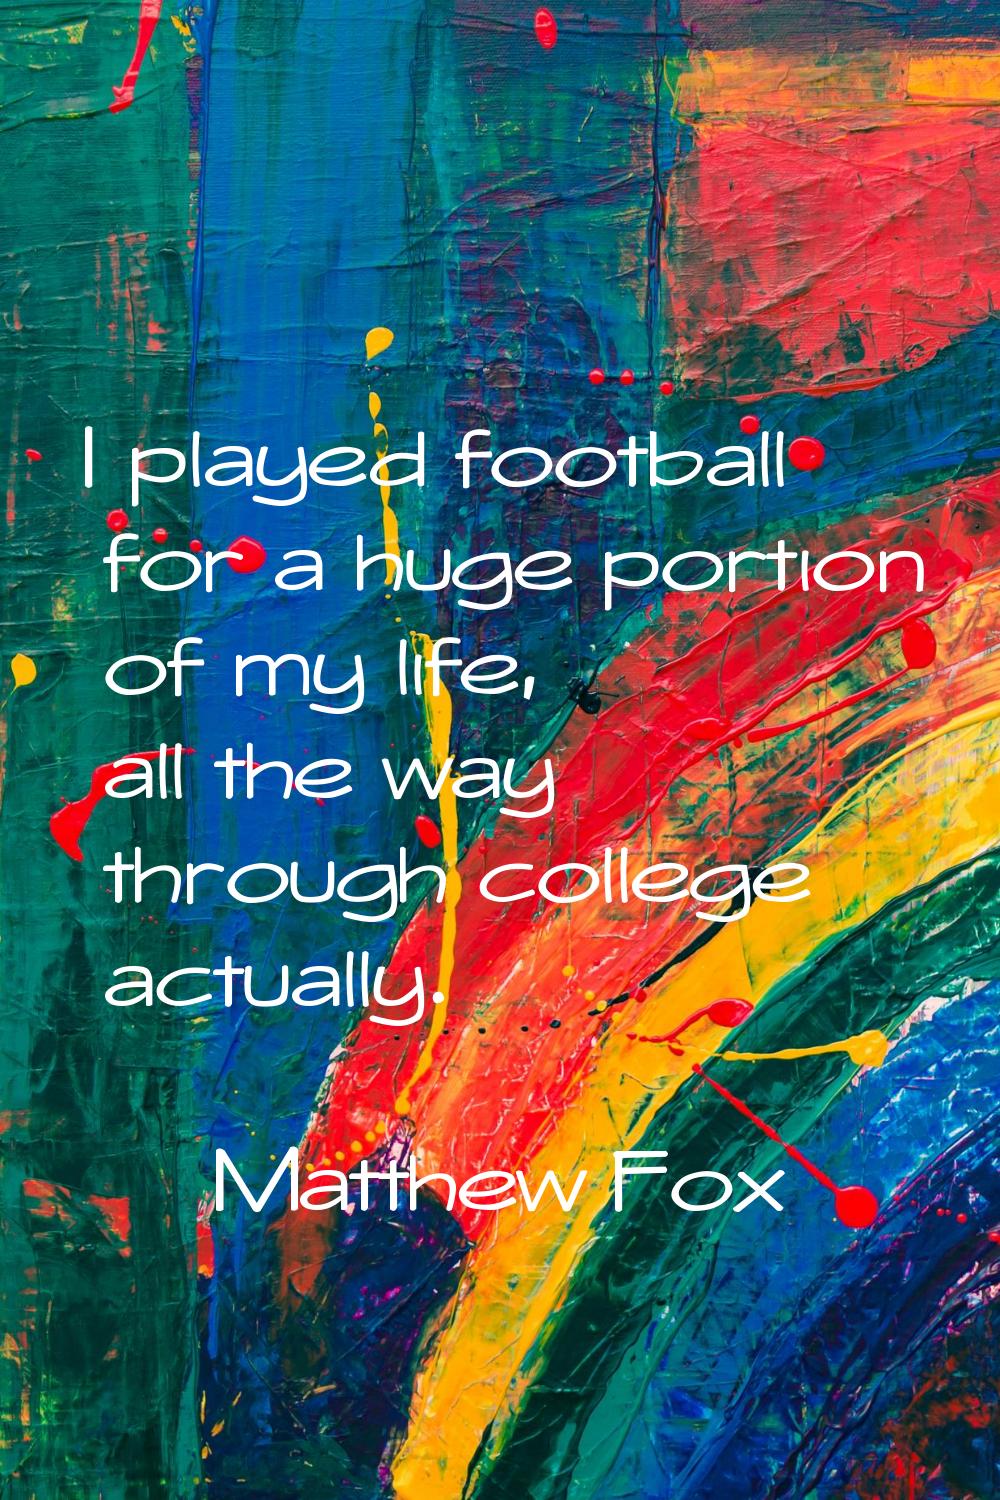 I played football for a huge portion of my life, all the way through college actually.